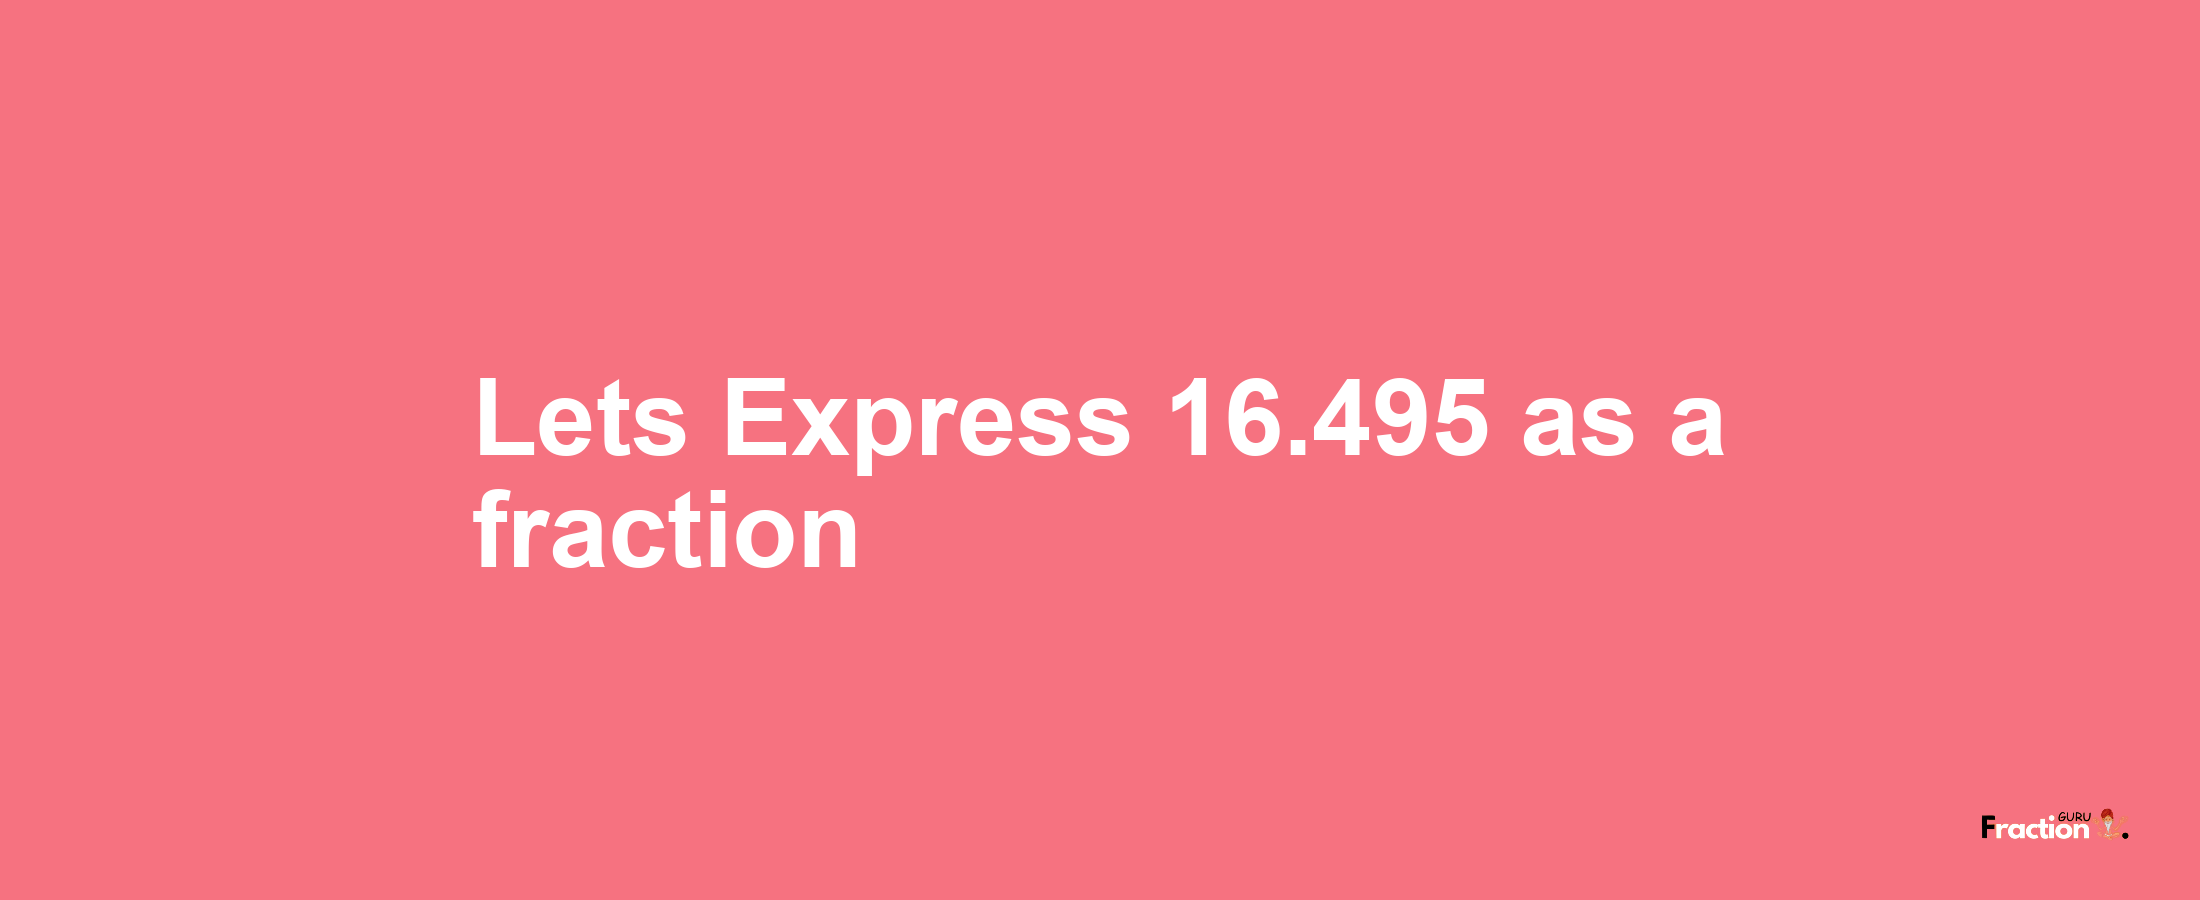 Lets Express 16.495 as afraction